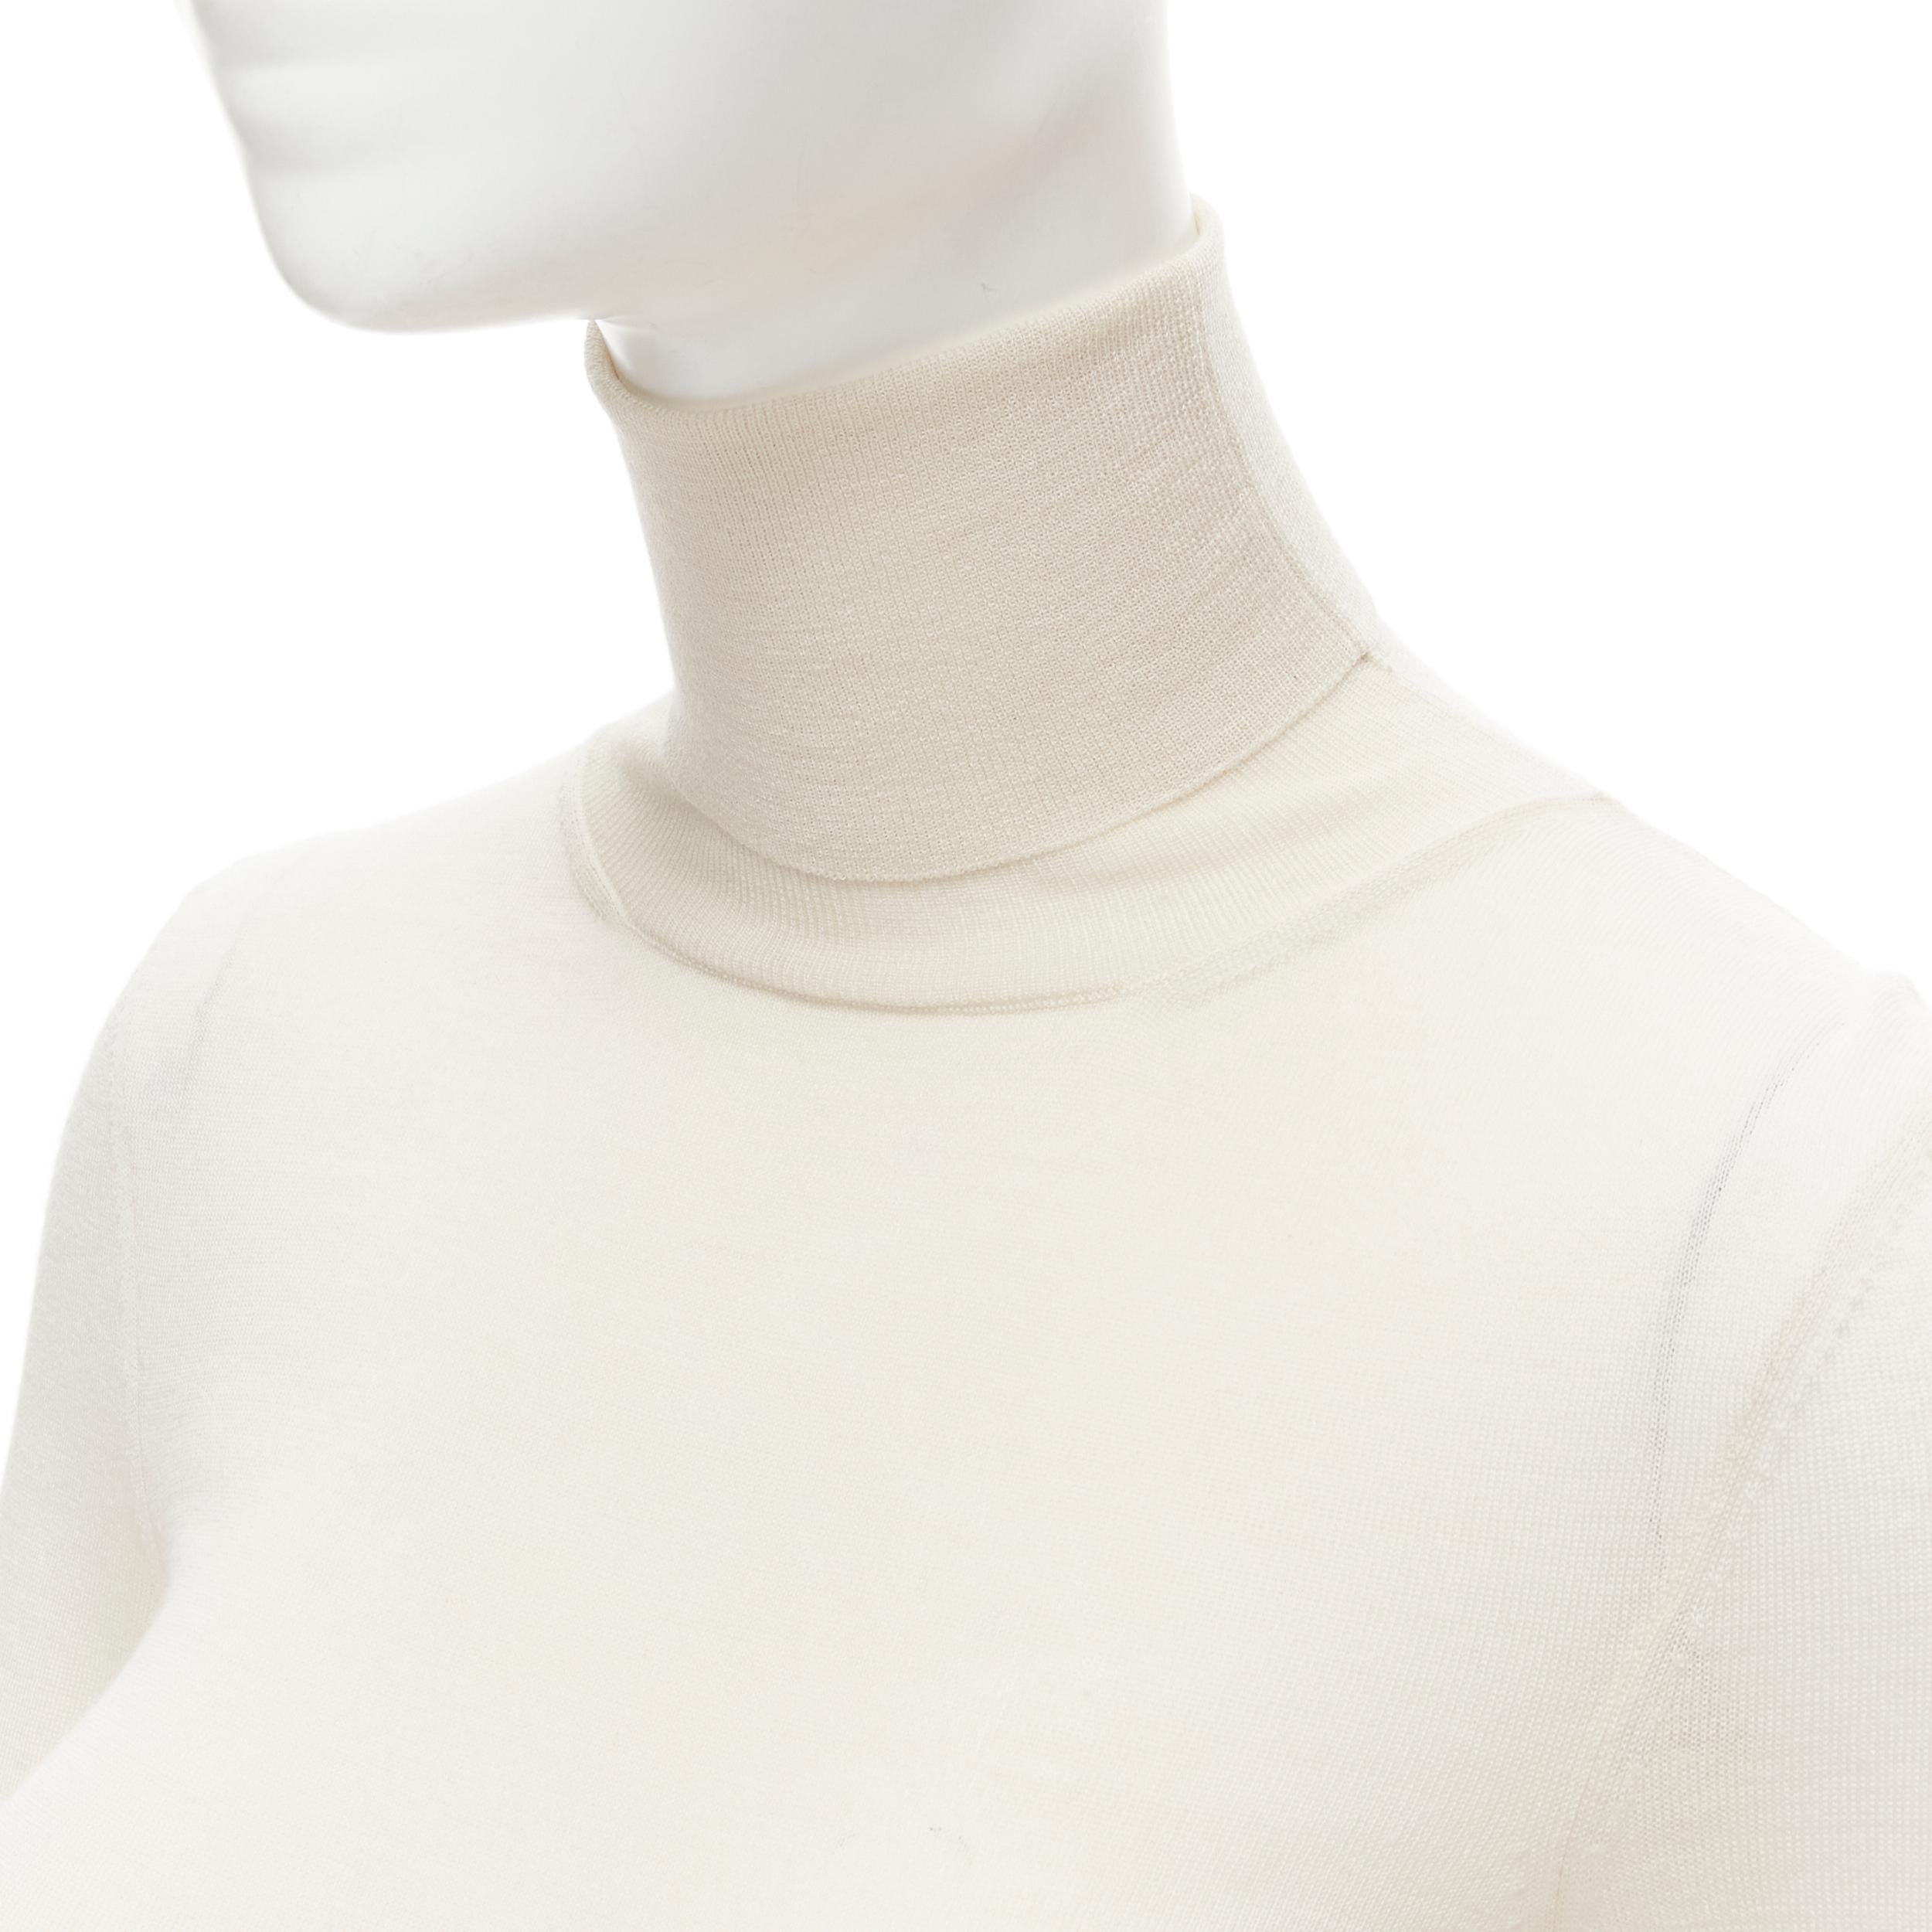 OLD CELINE Phoebe Philo cream fine knit turtleneck sweater S 
Reference: MELK/A00046 
Brand: Celine 
Designer: Phoebe Philo 
Color: Beige 
Pattern: Solid 

CONDITION: 
Condition: Very good, this item was pre-owned and is in very good condition.